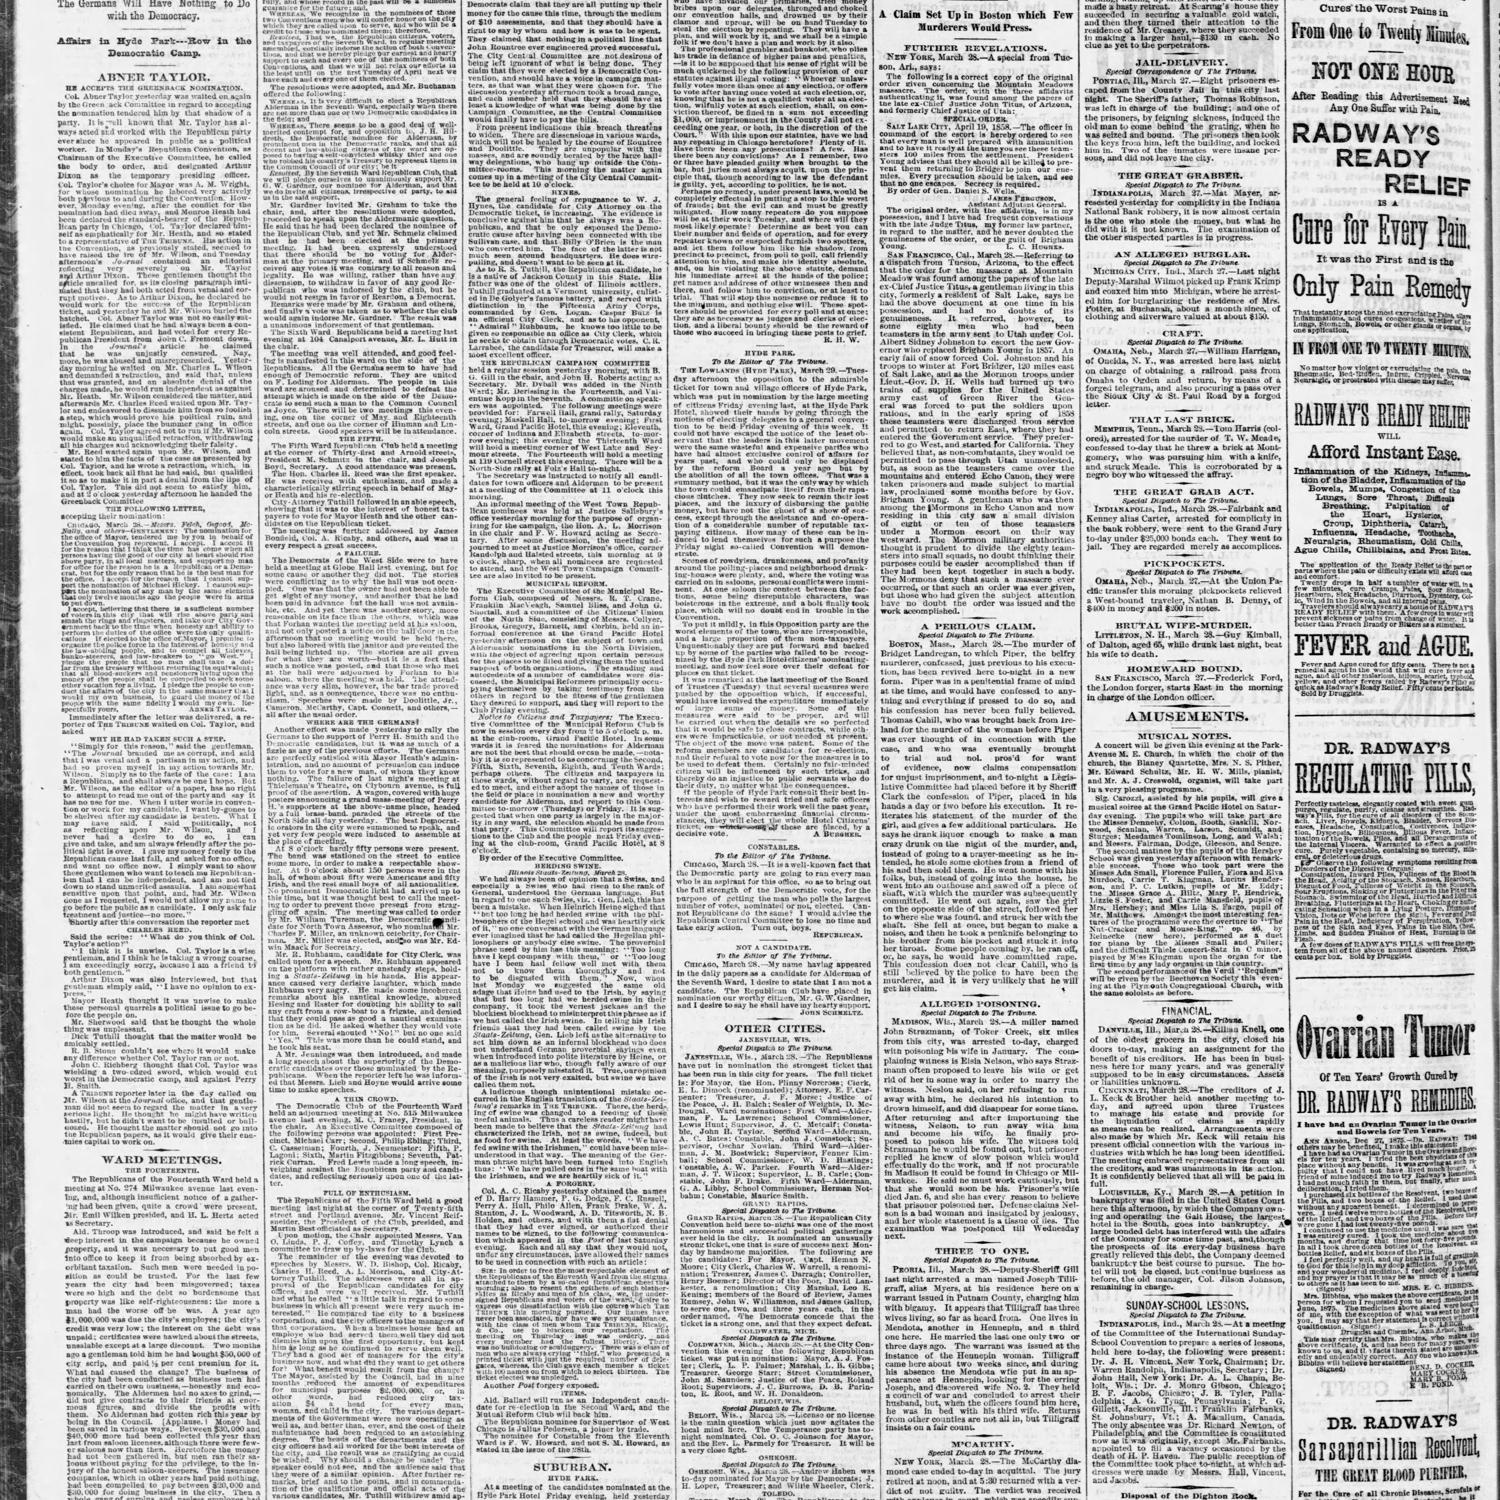 The Chicago Tribune, 1877-03-29, page 2